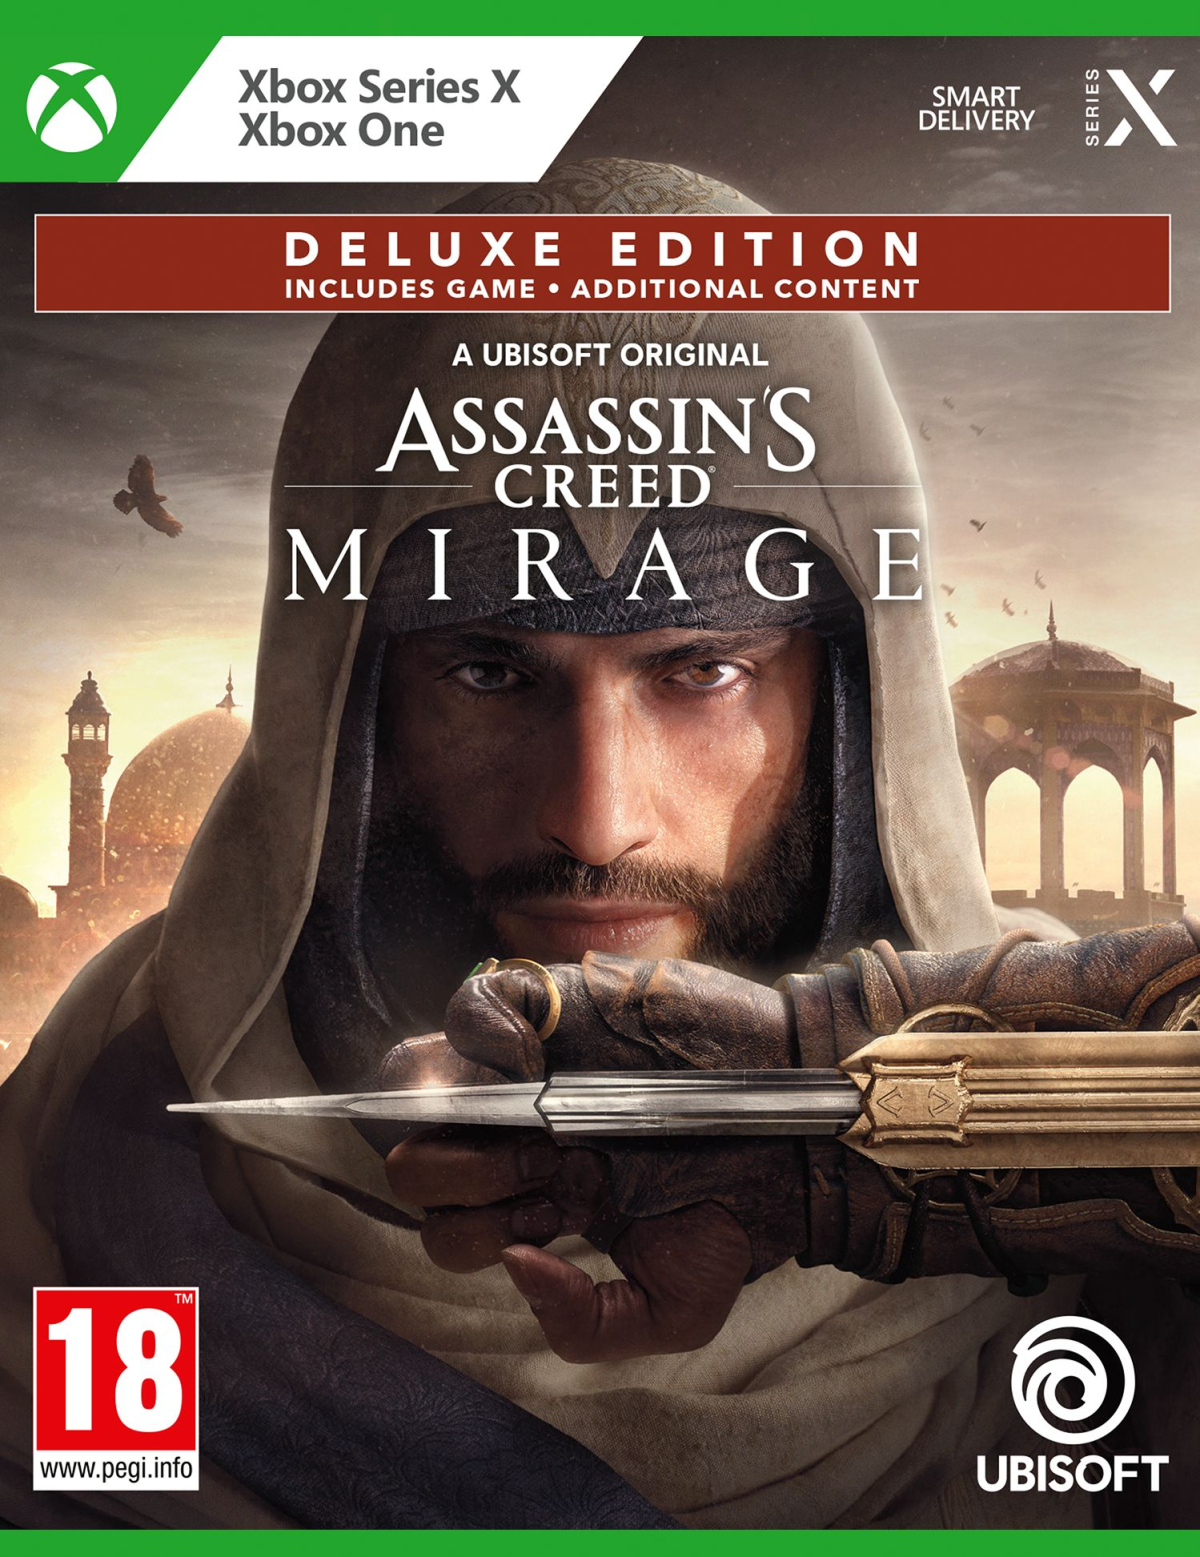 XBOXOne/SeriesX Assassin´s Creed Mirage Collector´s Edition